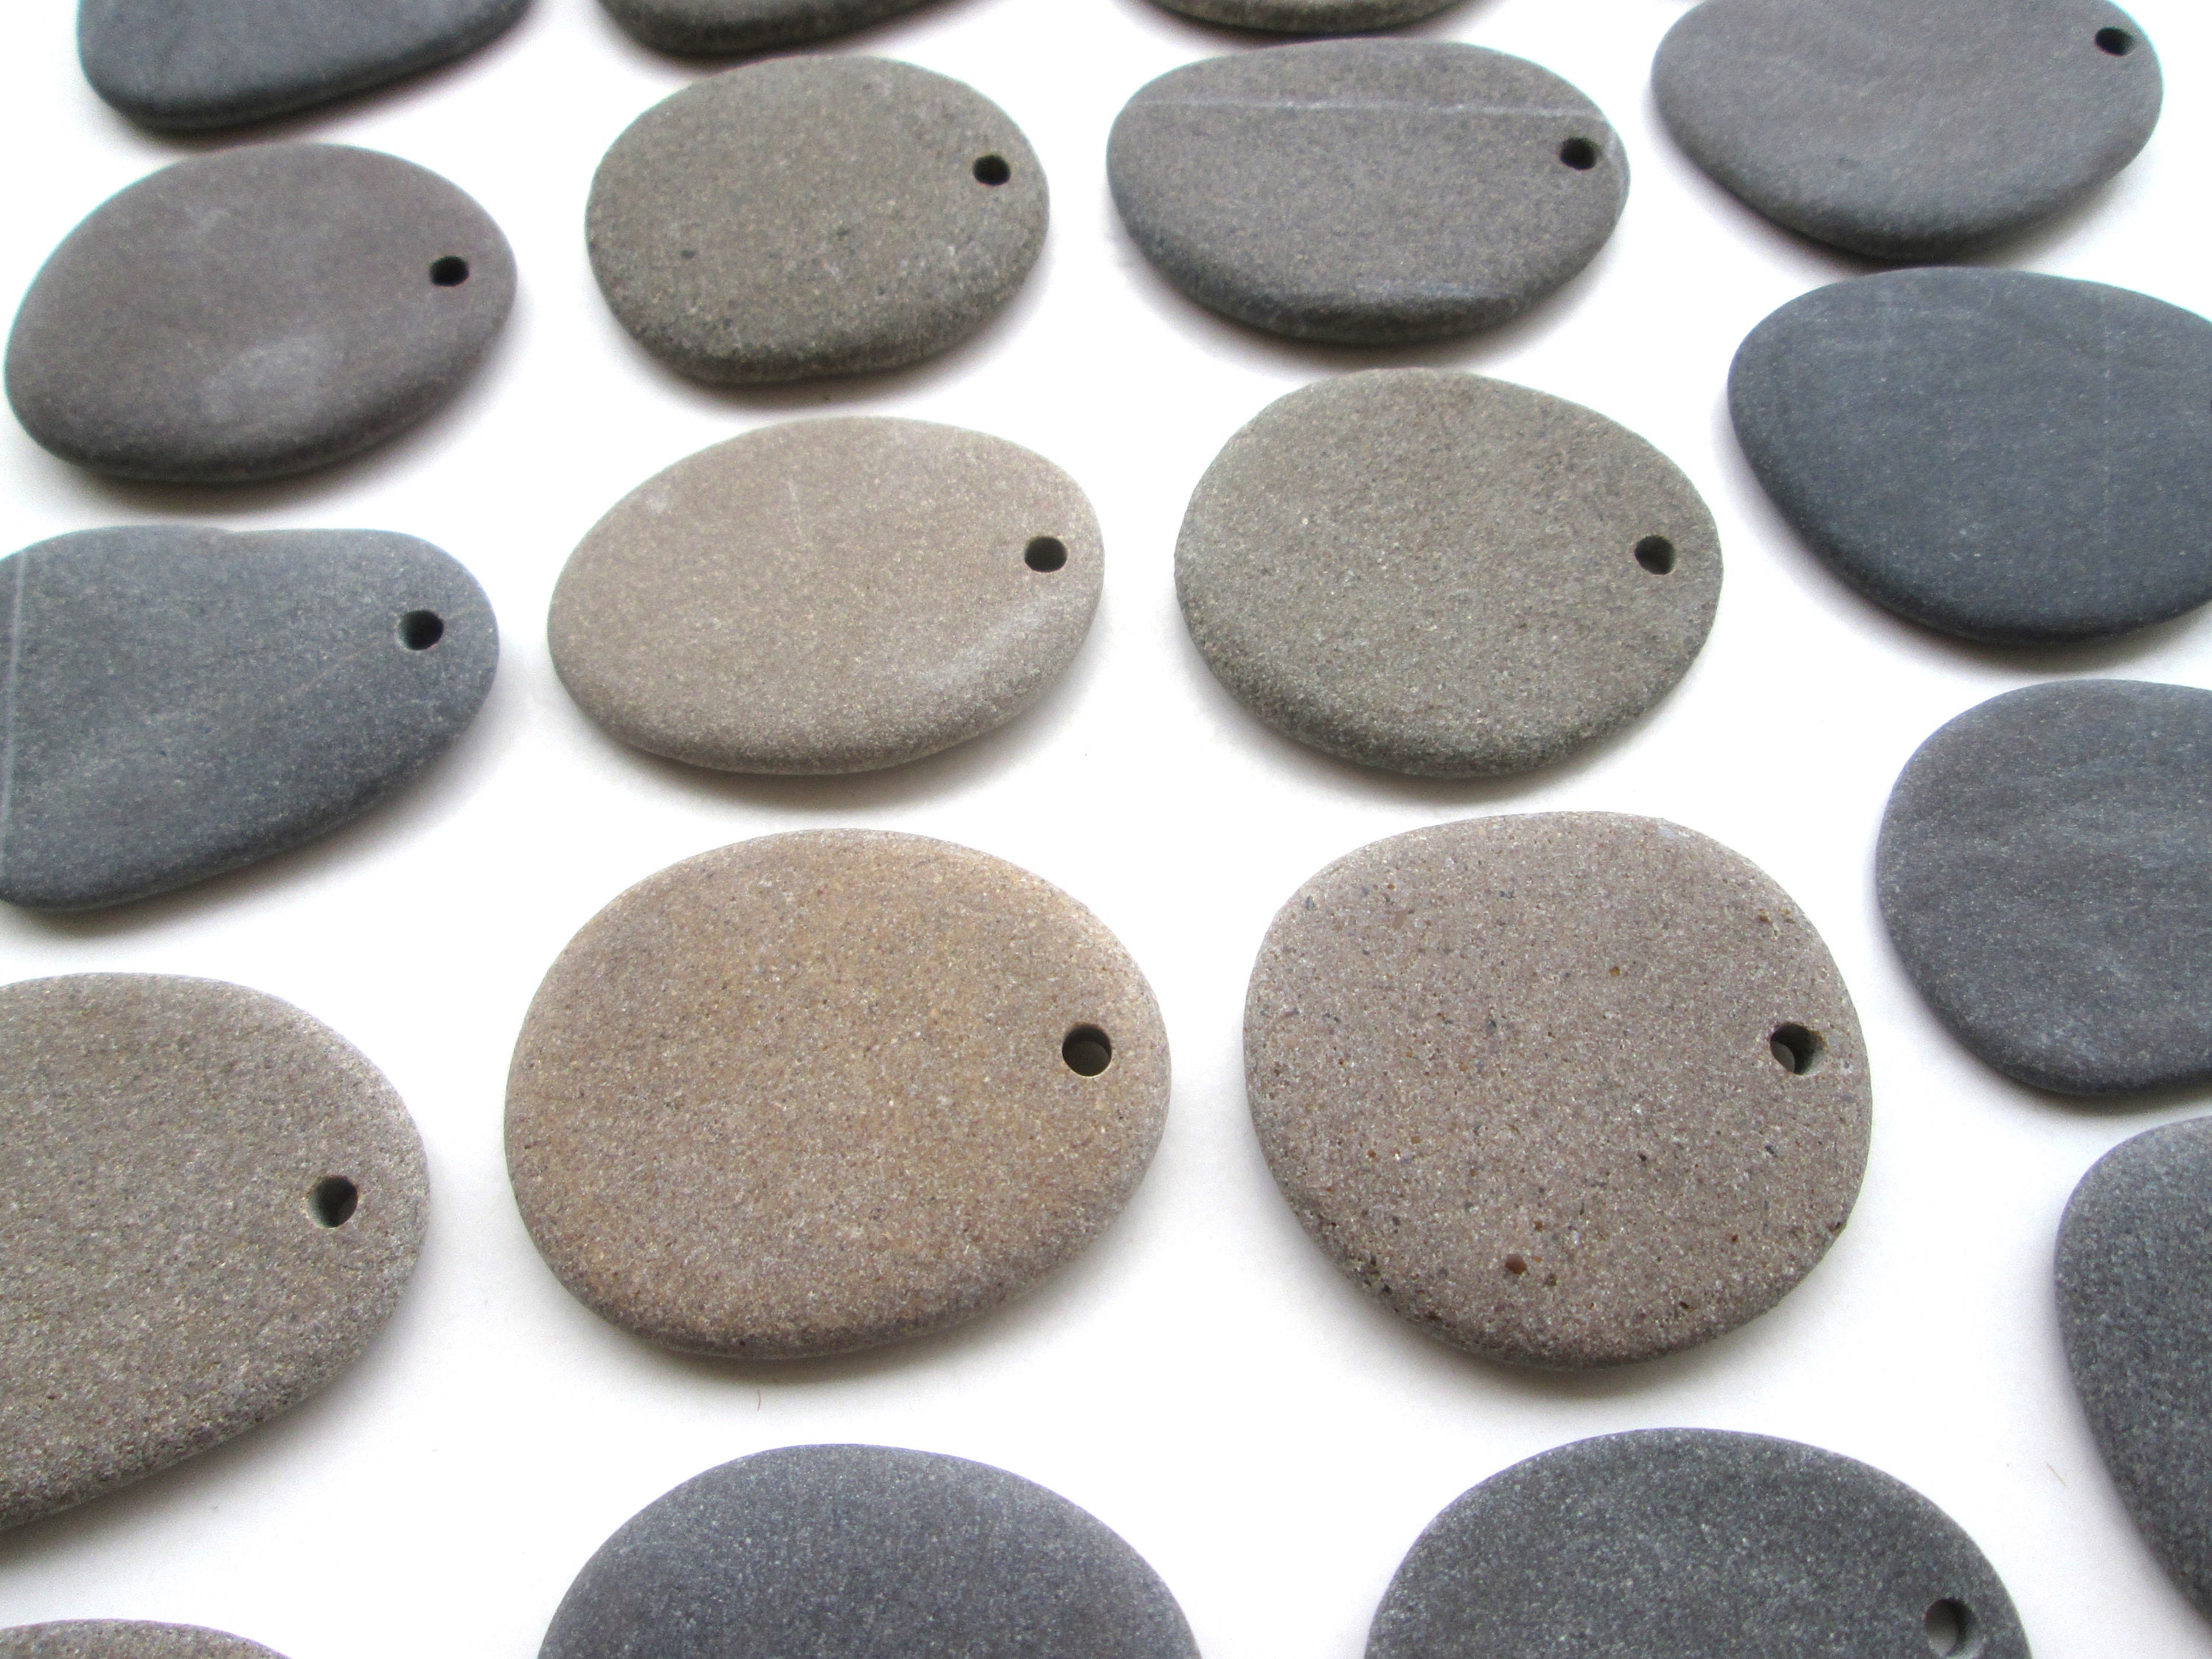 Drilled Flat Plain Beach Stones, Art Craft Rocks, Large River Rocks to  Paint, Set of 10, LARGE STONES With HOLES, 1 3/4 Inch, 40-44 Mm 